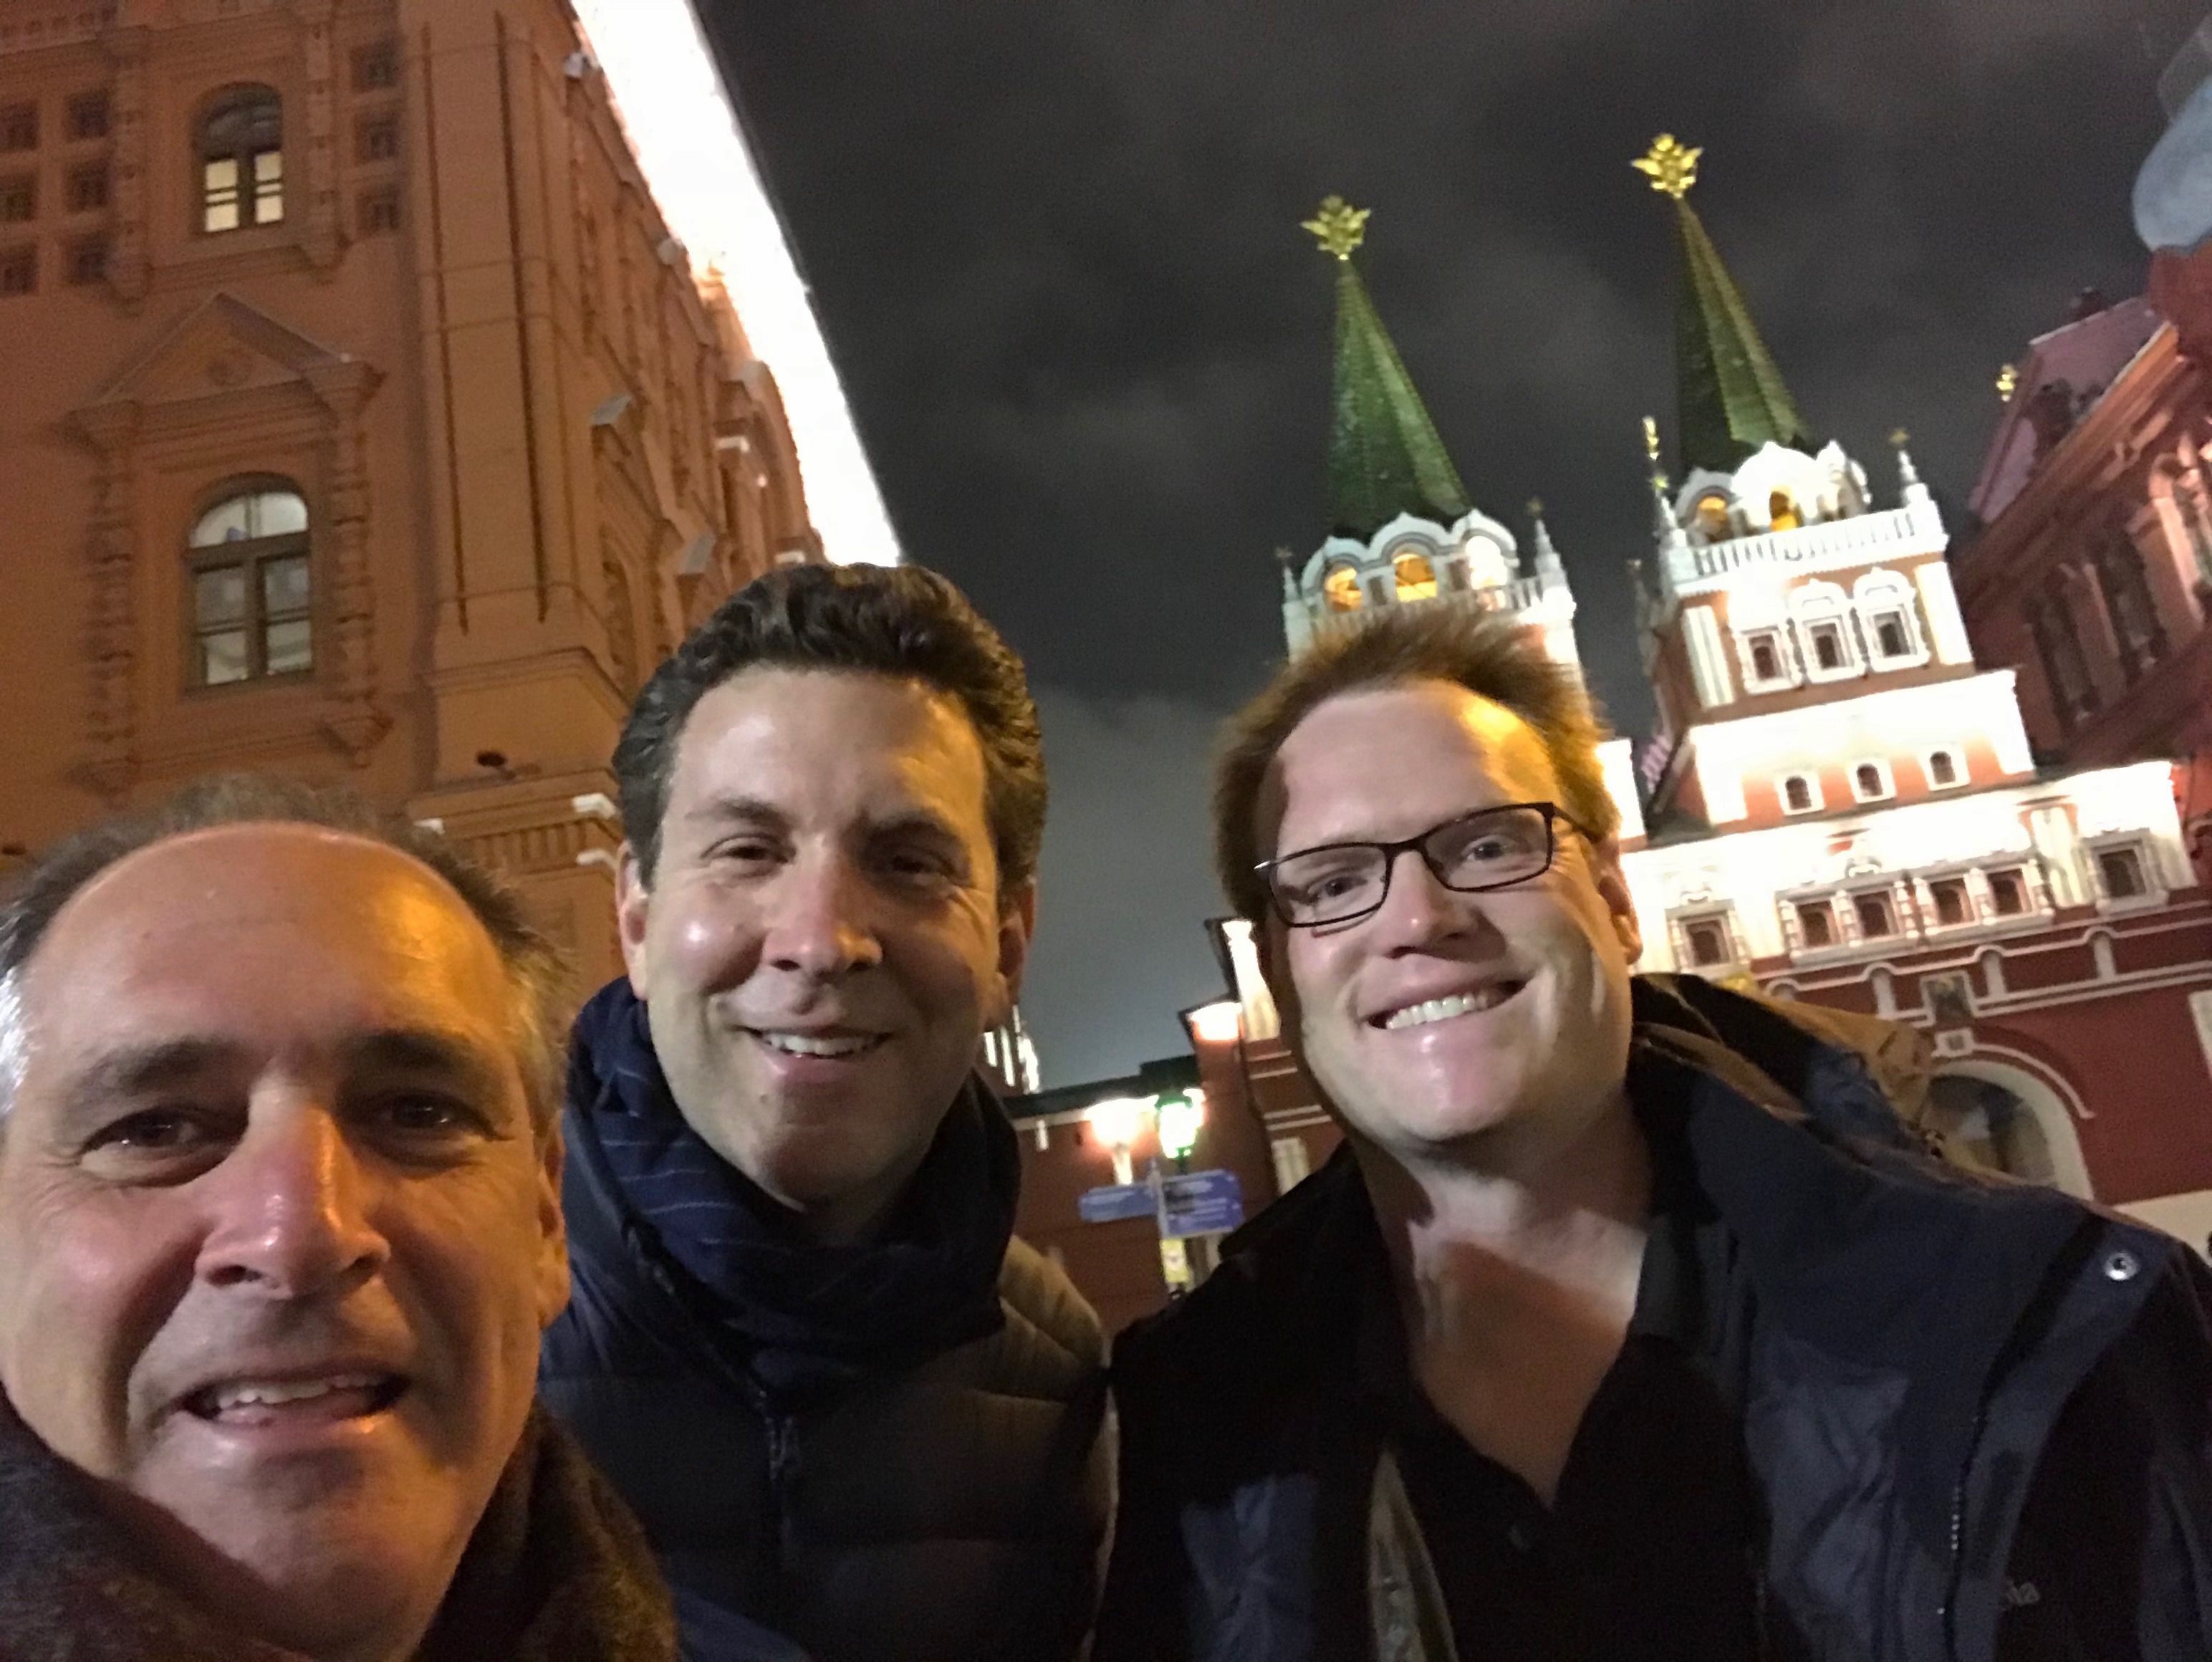 A selfie shot of Jason Kane (right), William Brangham (middle) and Jon Cohen (left) in Red Square. Image by Jon Cohen. Russia, 2017.